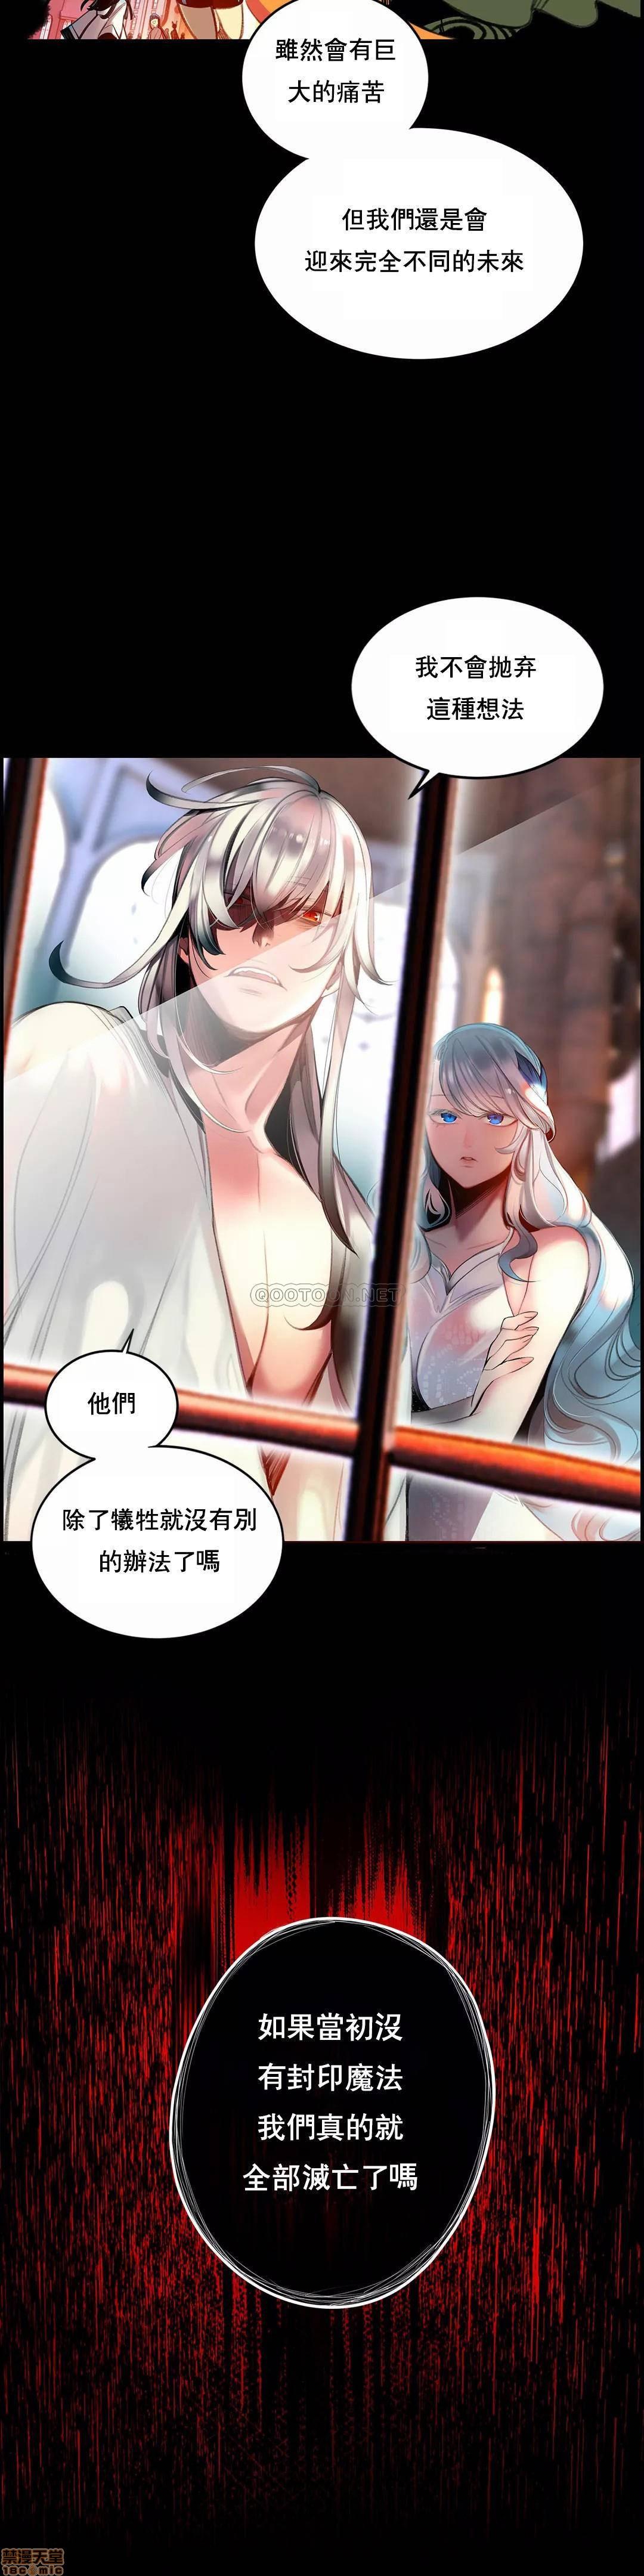 [Juder] Lilith`s Cord (第二季) Ch.77-93 end [Chinese] 96